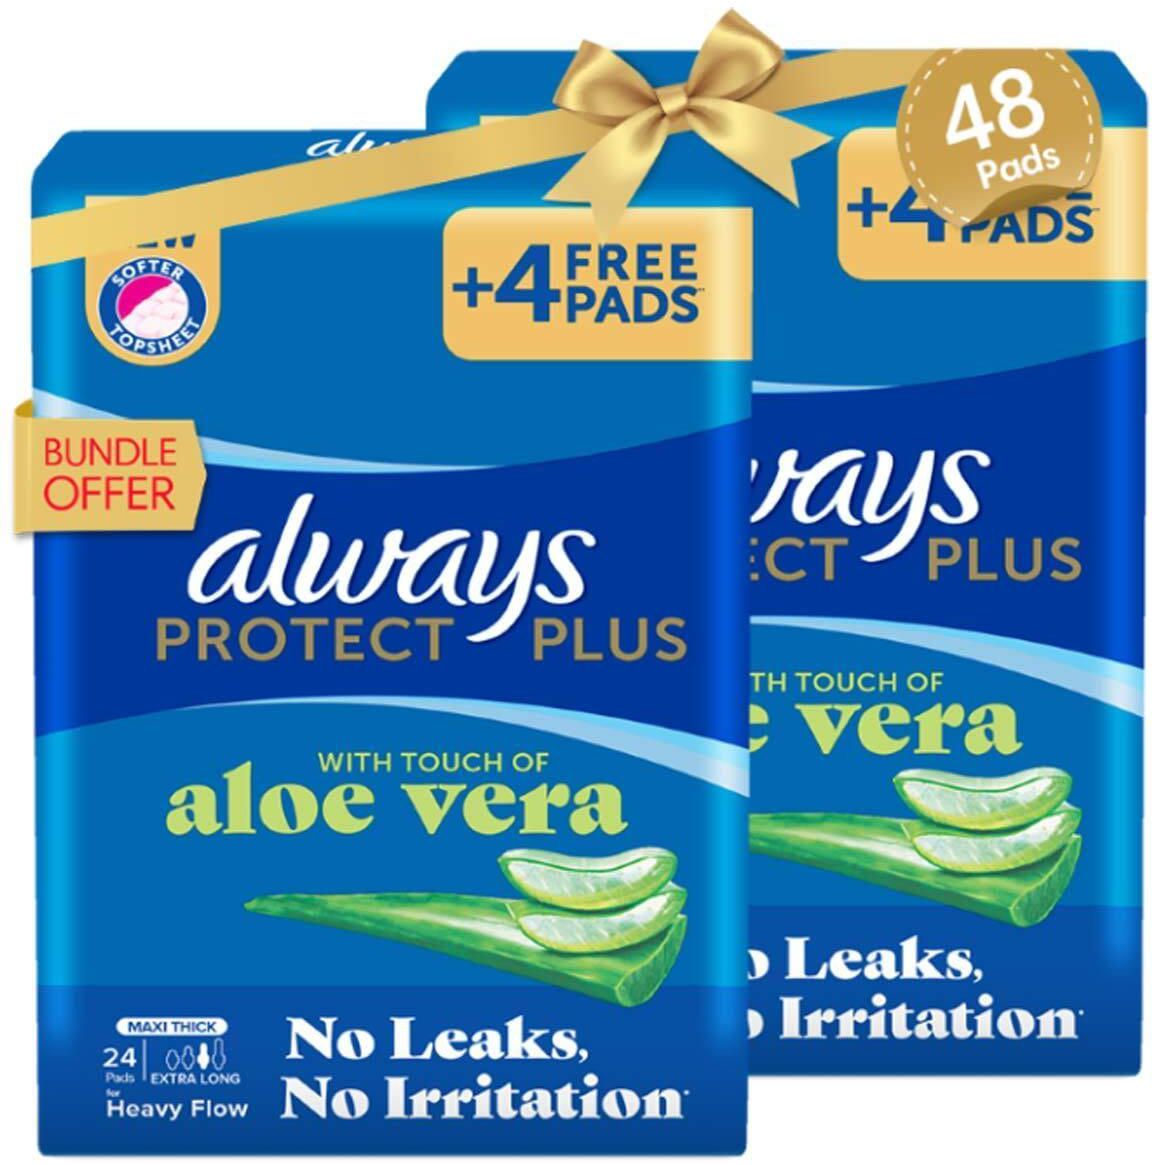 Always Protect Plus Pads with Touch of Aloe Vera - Extra Long - Maxi Thick - 48 Pads